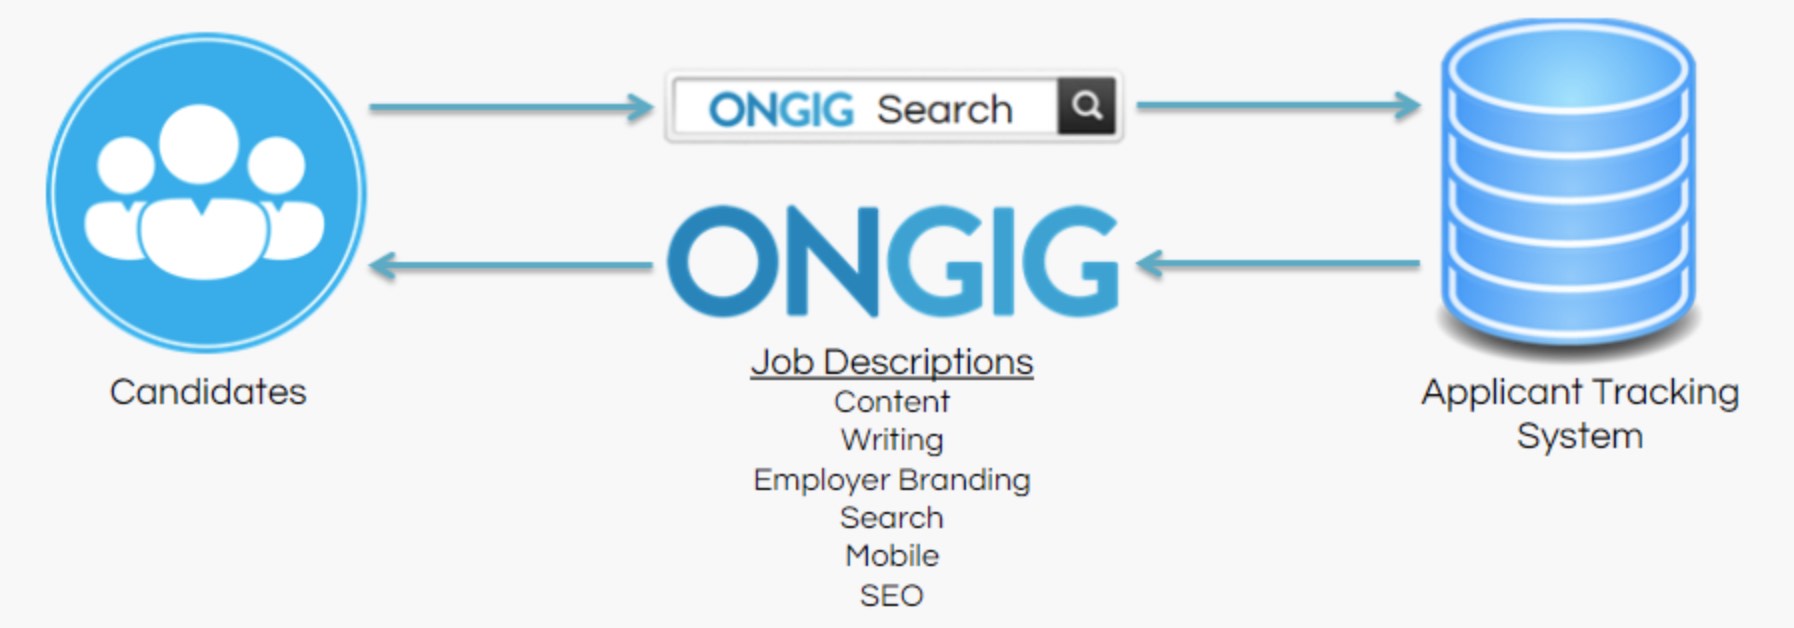 Ongig ats integration -- how it works